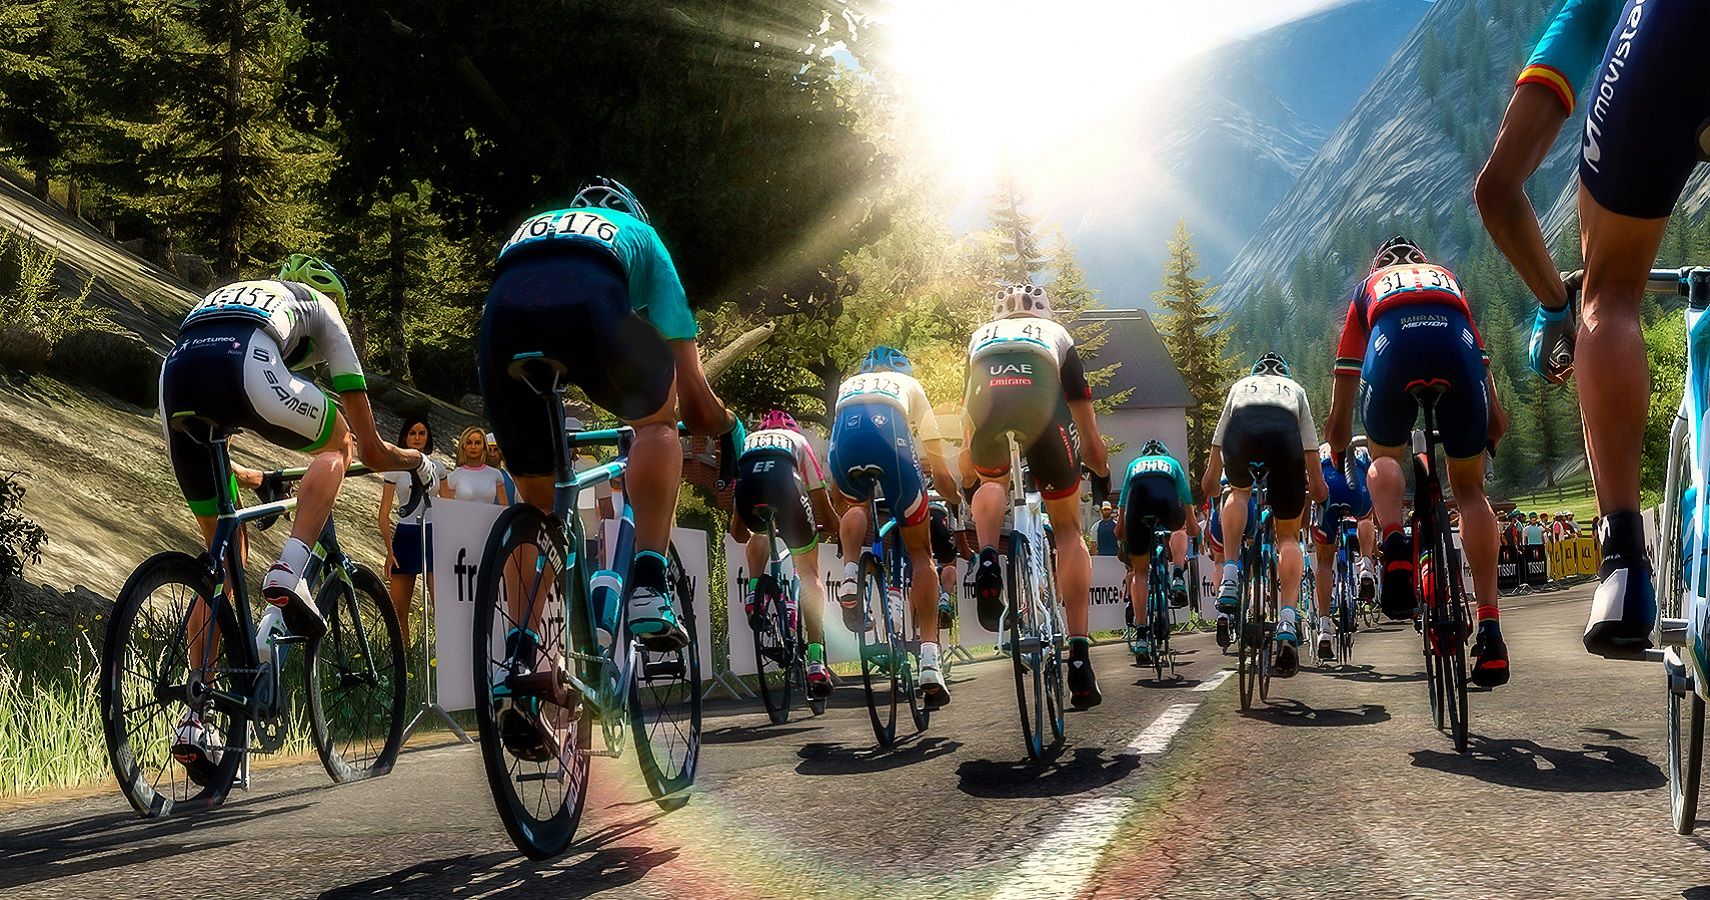 I Asked the Developers of Pro Cycling Manager 2022 